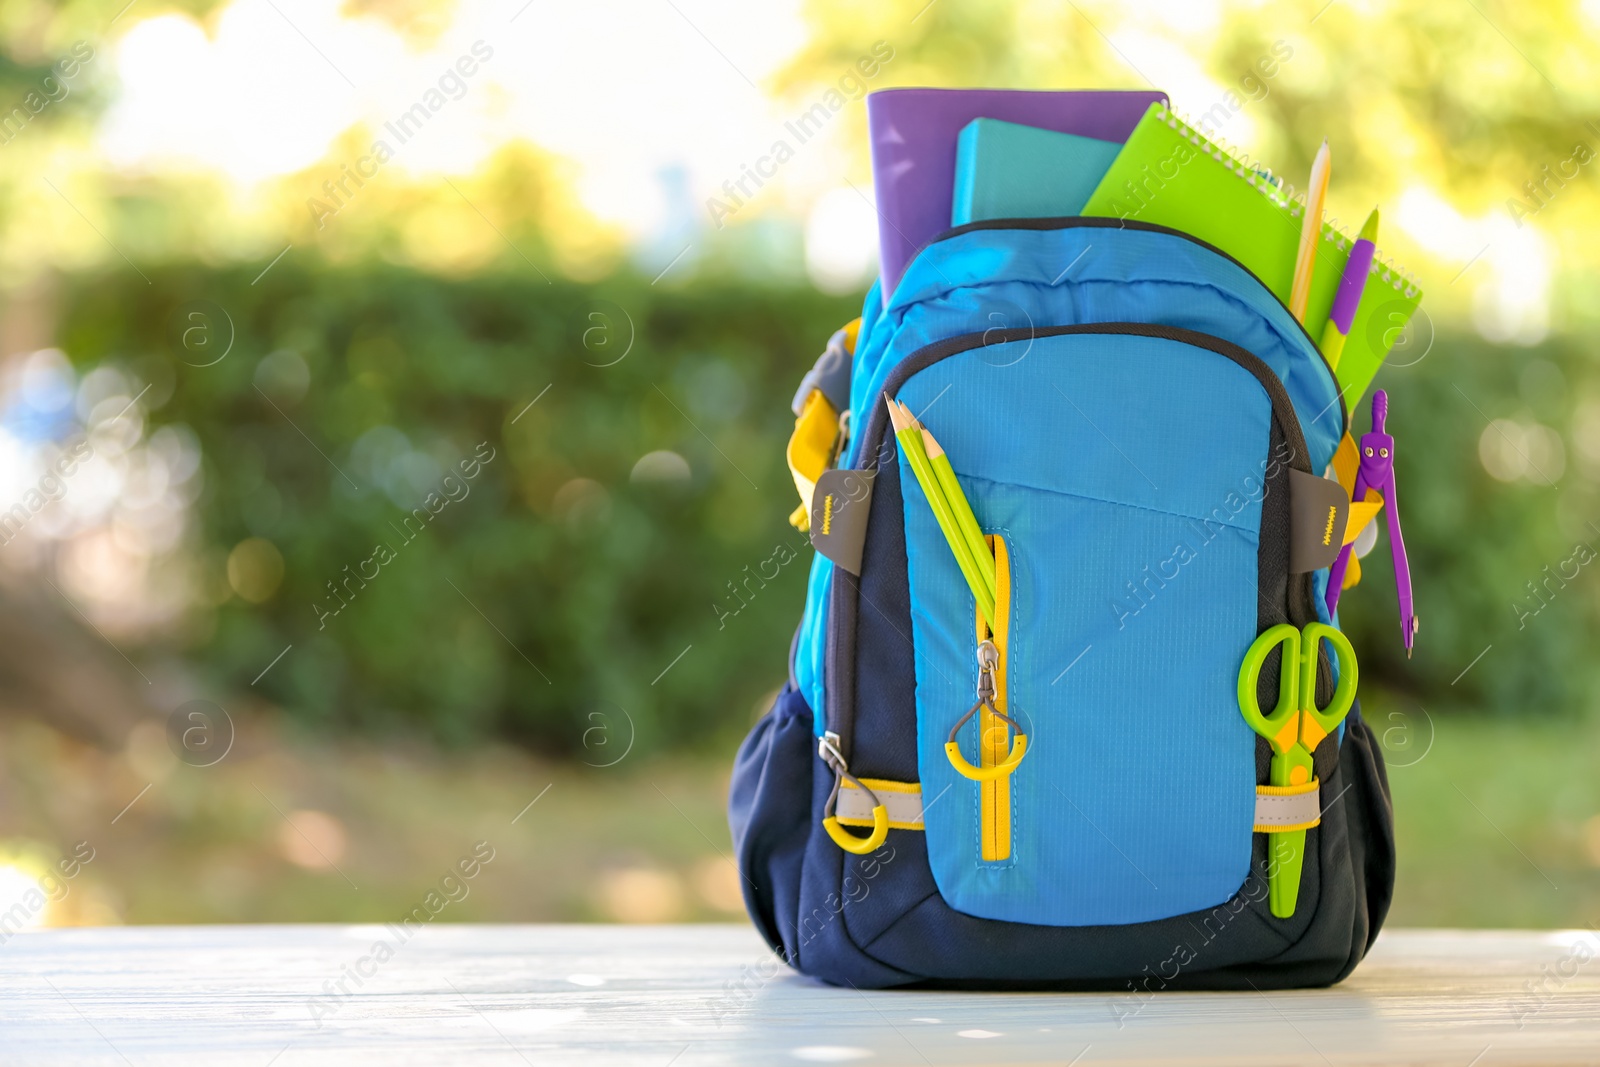 Photo of Backpack with school stationery on table outdoors